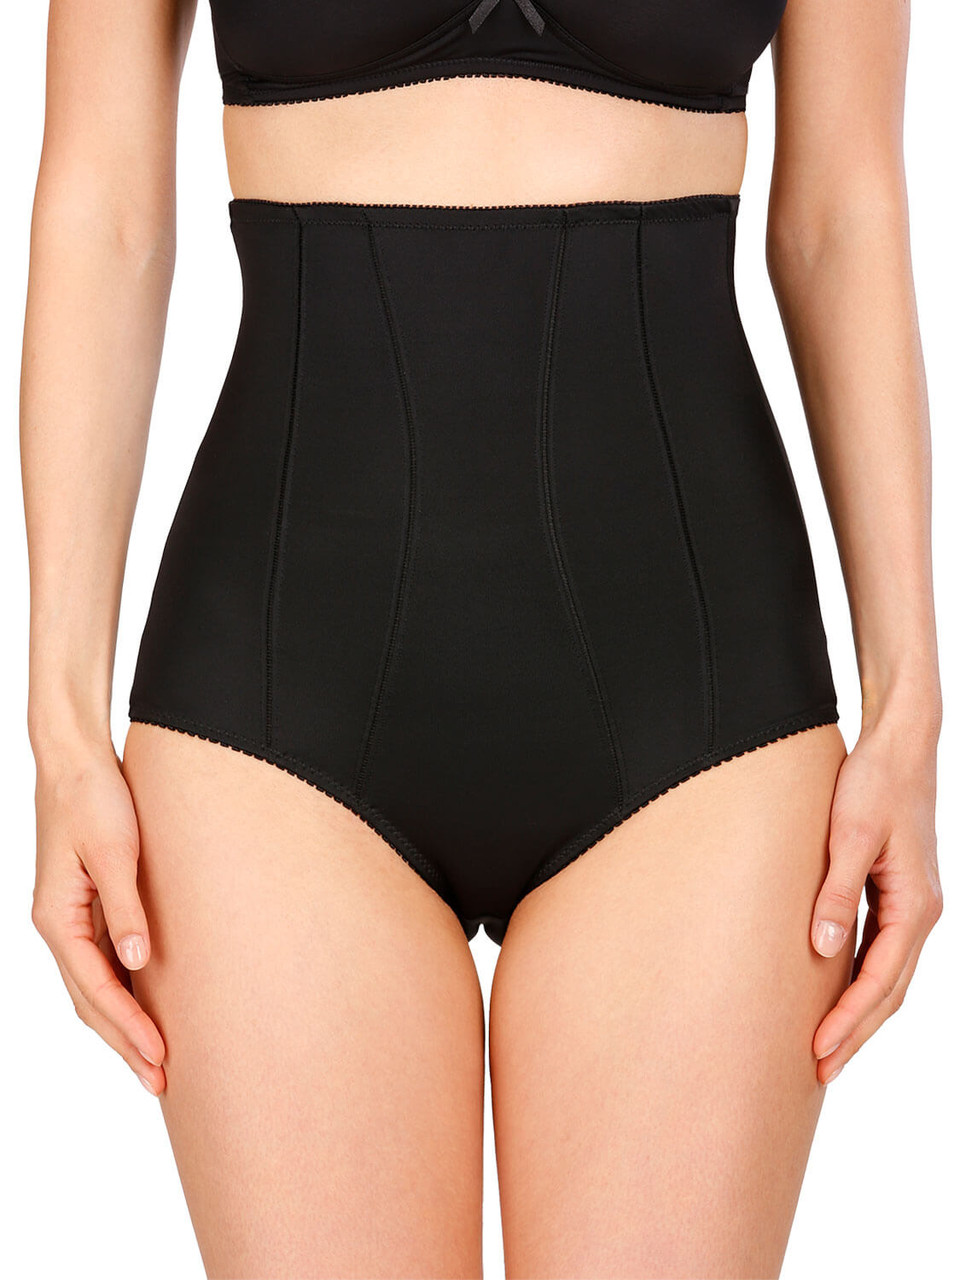 Perfect Body High Waist Seamless Shaping Panty Girdle (S-4XL) by